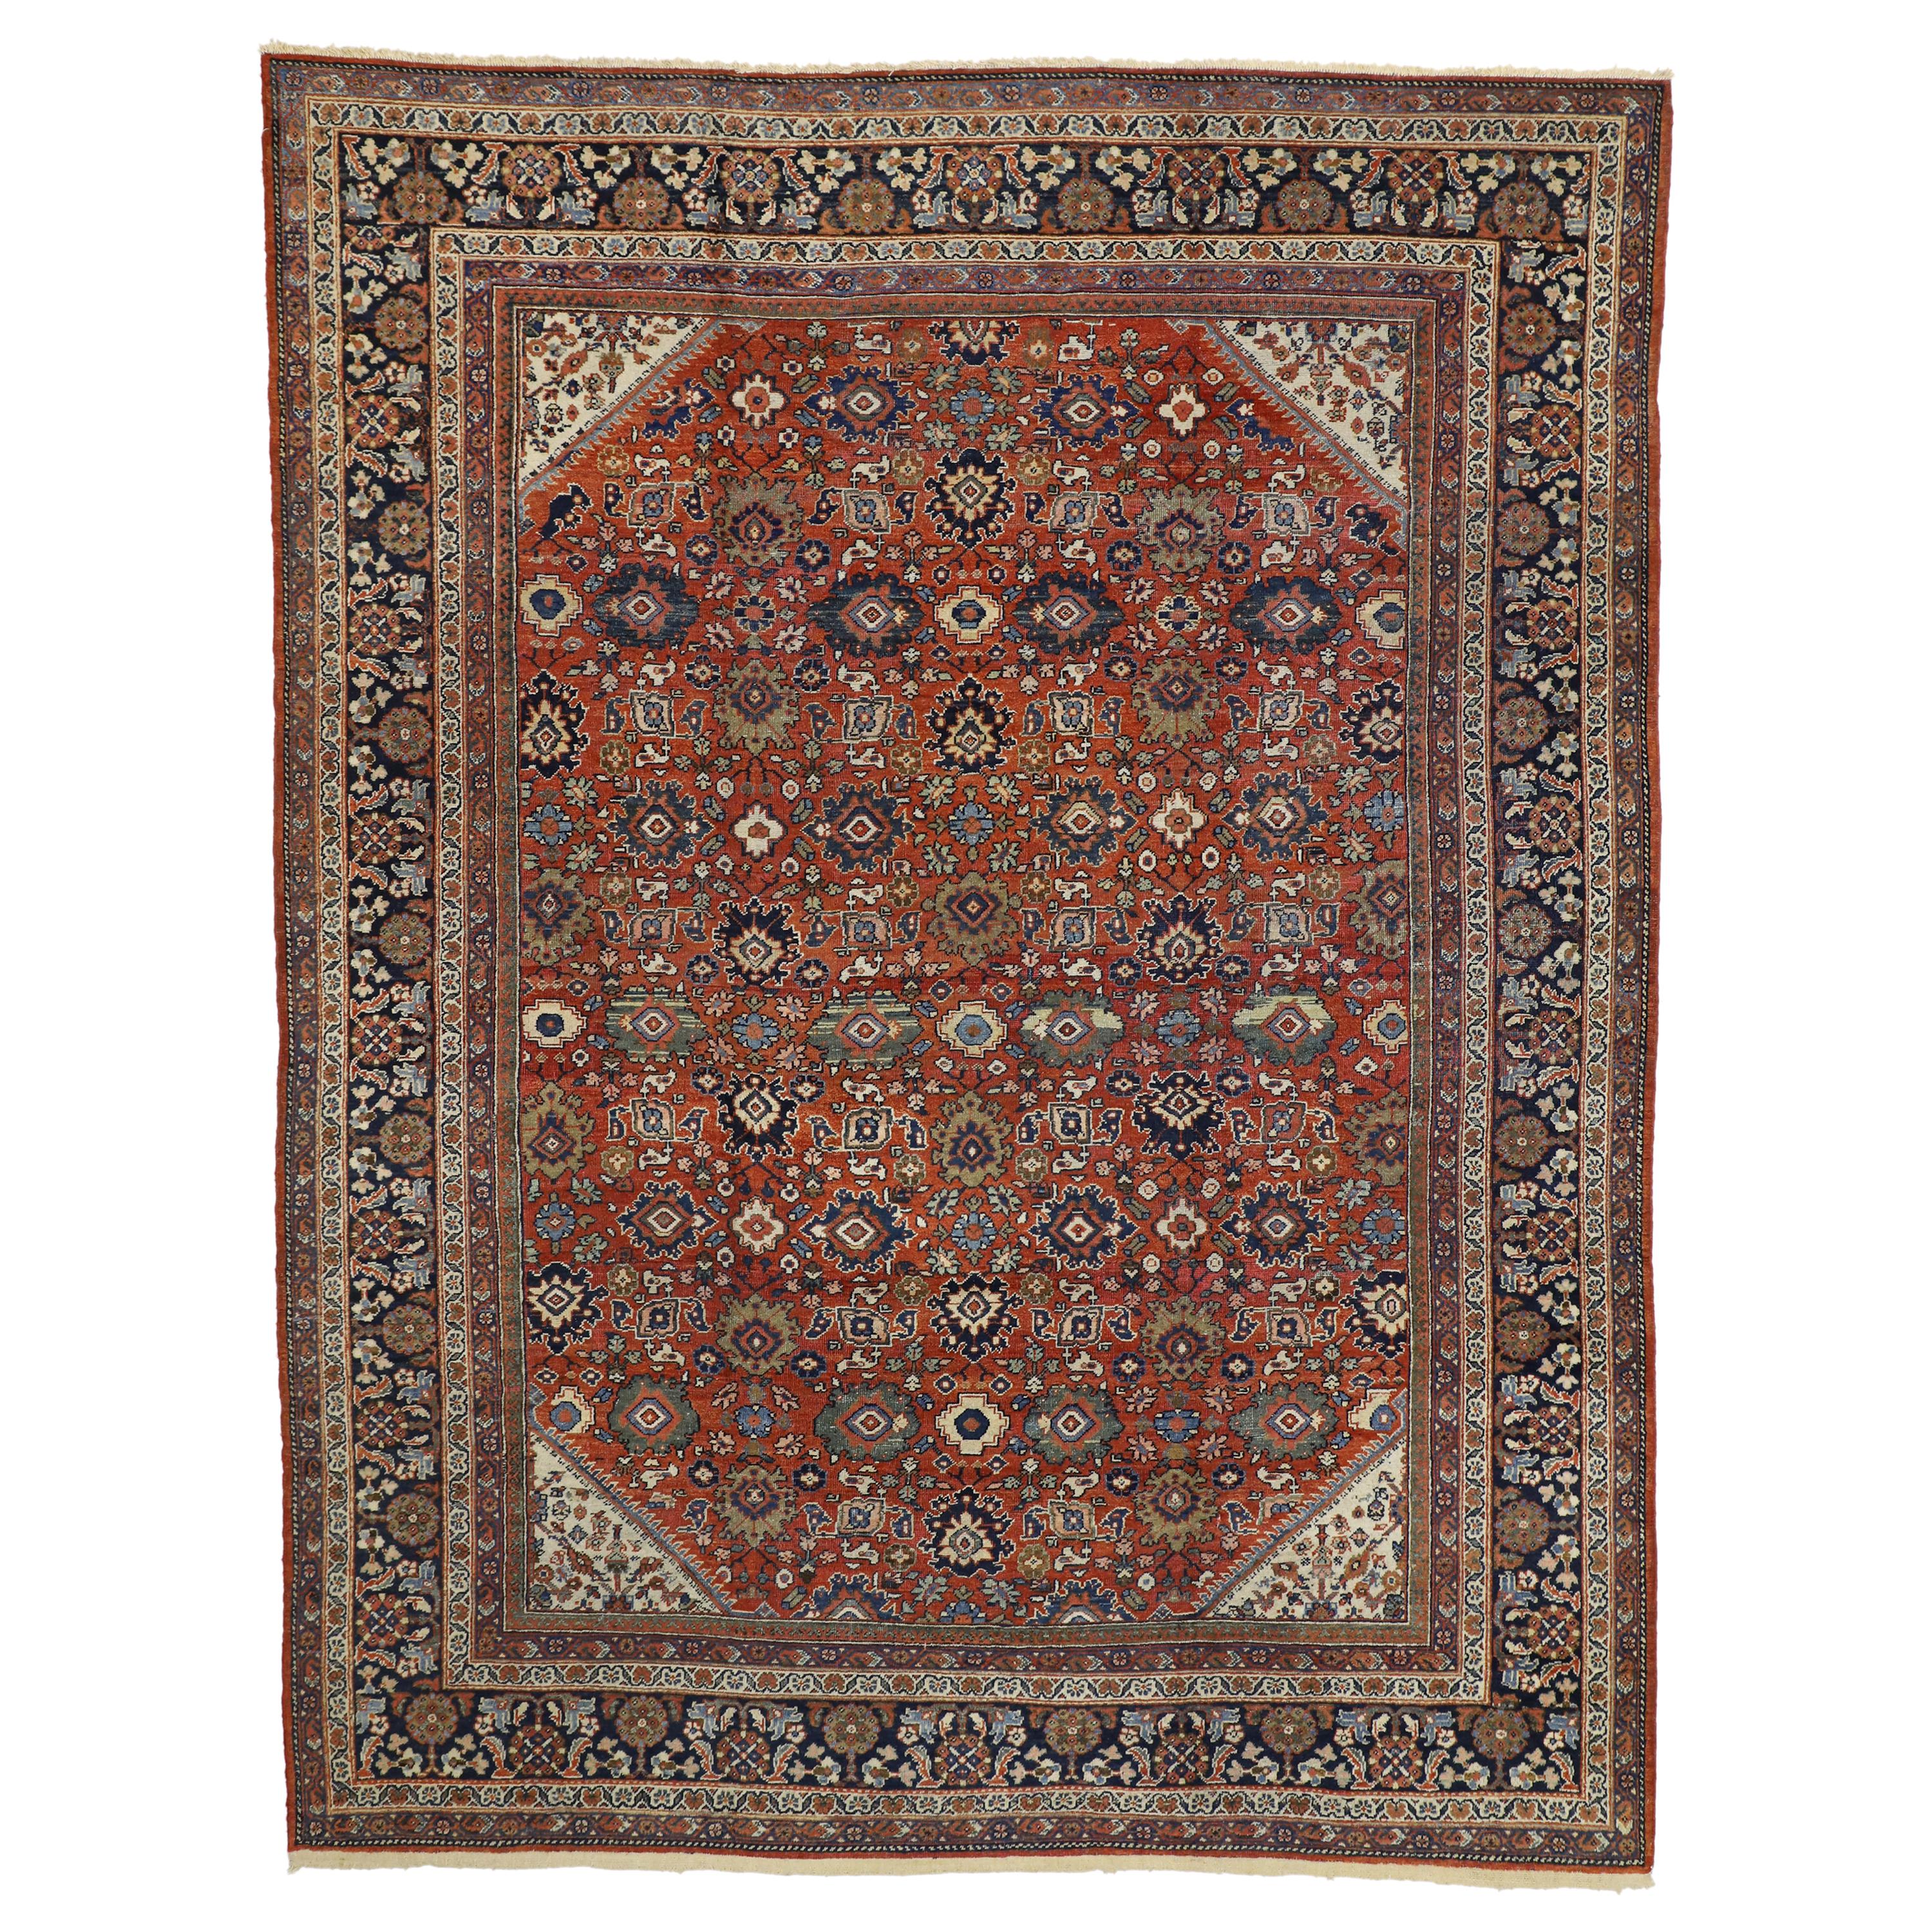 Antique Persian Mahal Area Rug with Federal and American Colonial Style